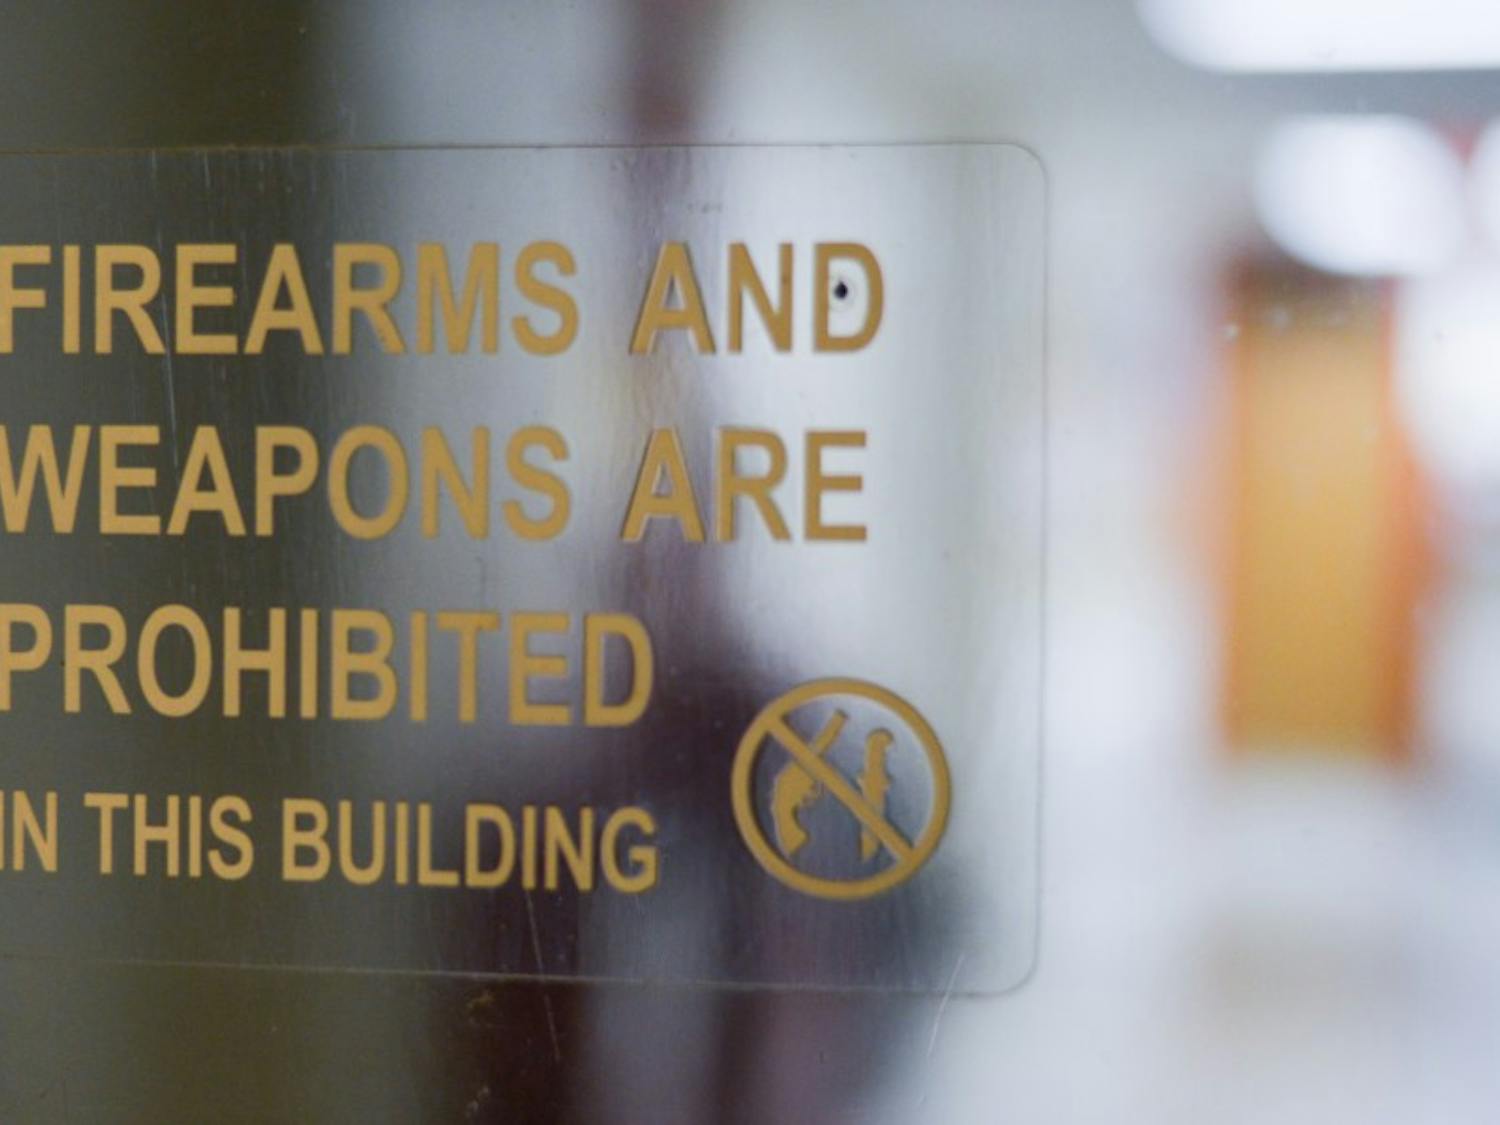 Concealed carry is currently prohibited in university buildings.